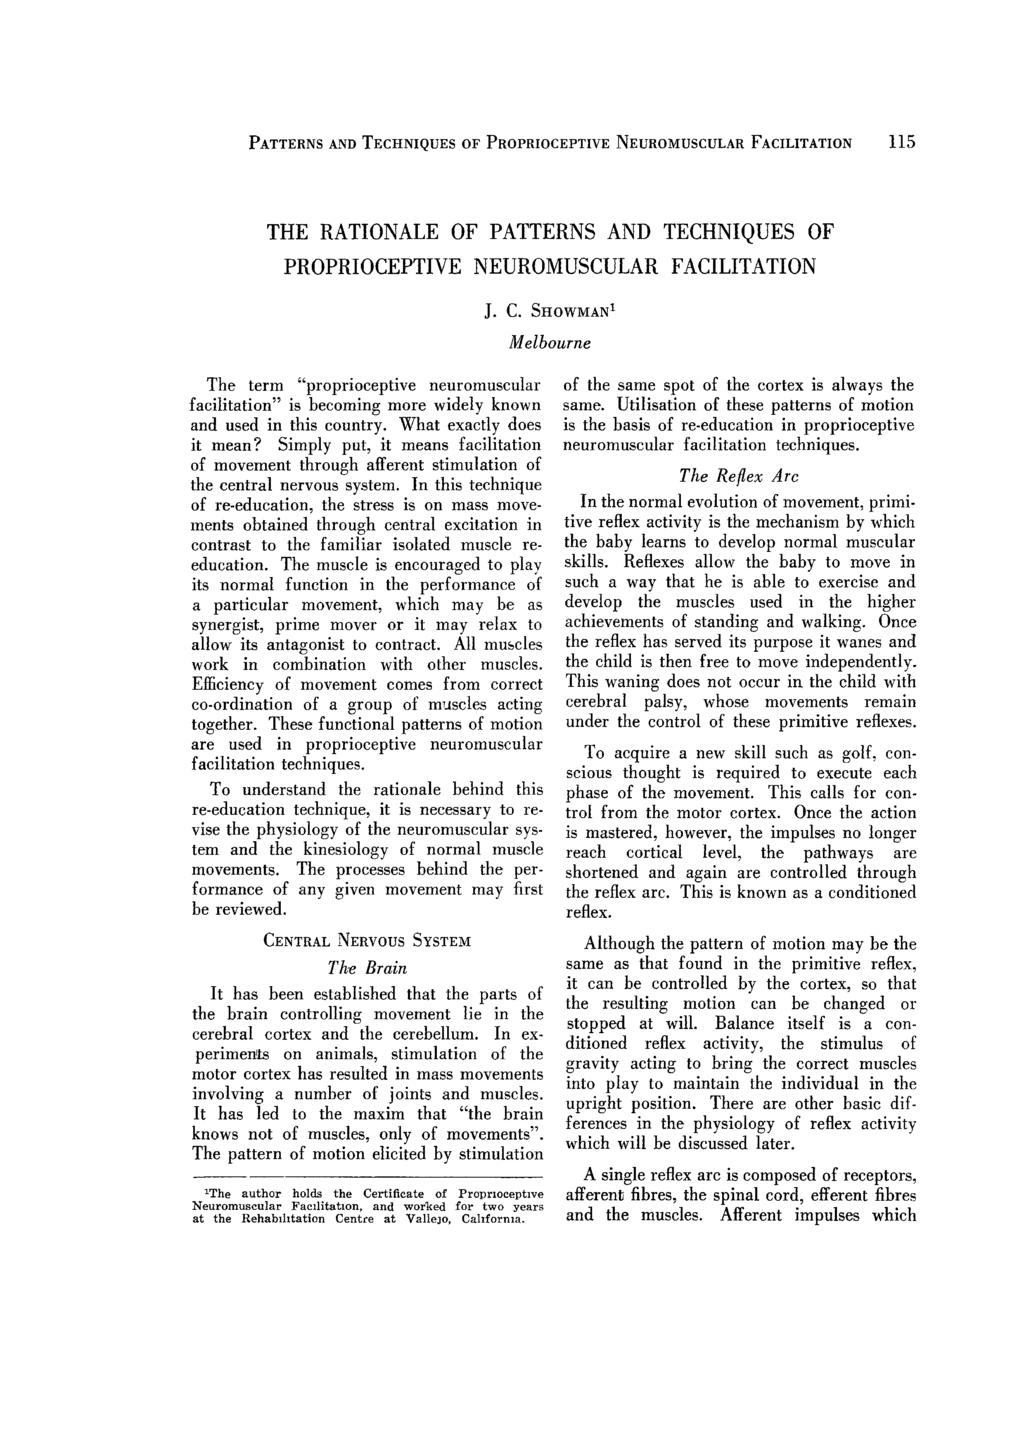 PATTERNS AND TECHNIQUES OF PROPRIOCEPTIVE NEUROMUSCULAR FACILITATION 115 THE RATIONALE OF PATTERNS AND TECHNIQUES OF PROPRIOCEPTIVE NEUROMUSCULAR FACILITATION J. C.